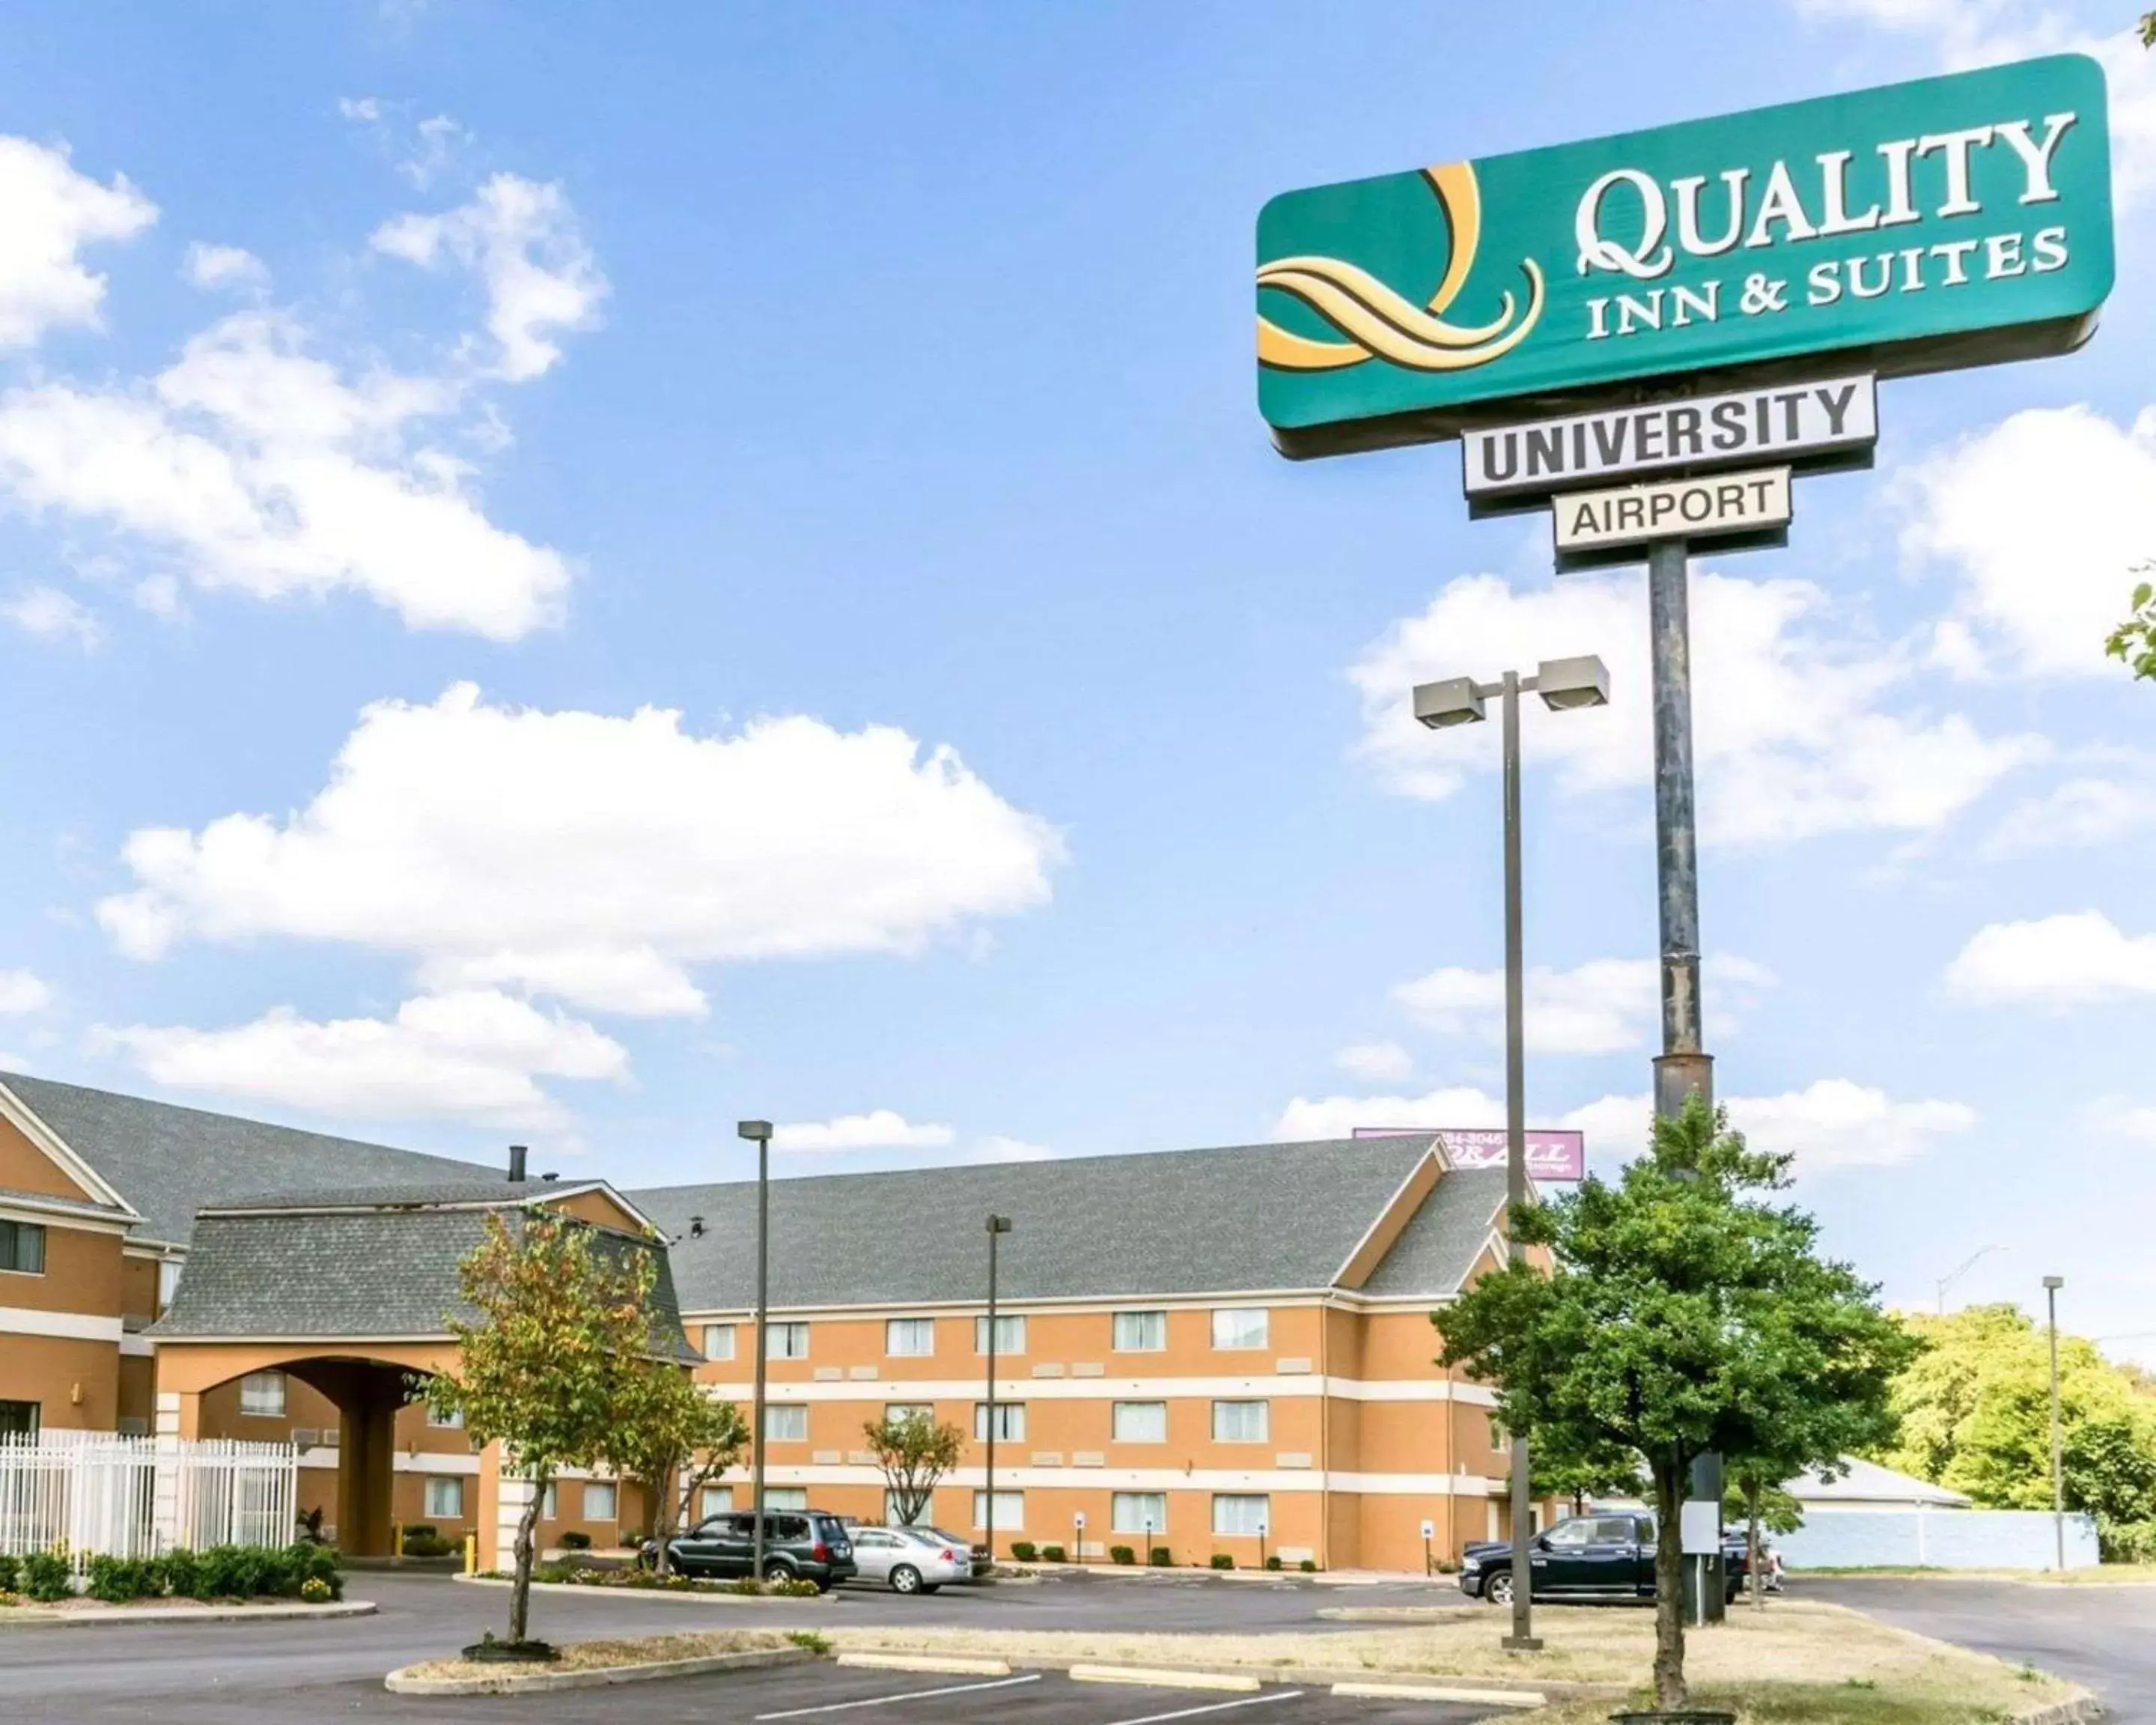 Property Building in Quality Inn & Suites University/Airport